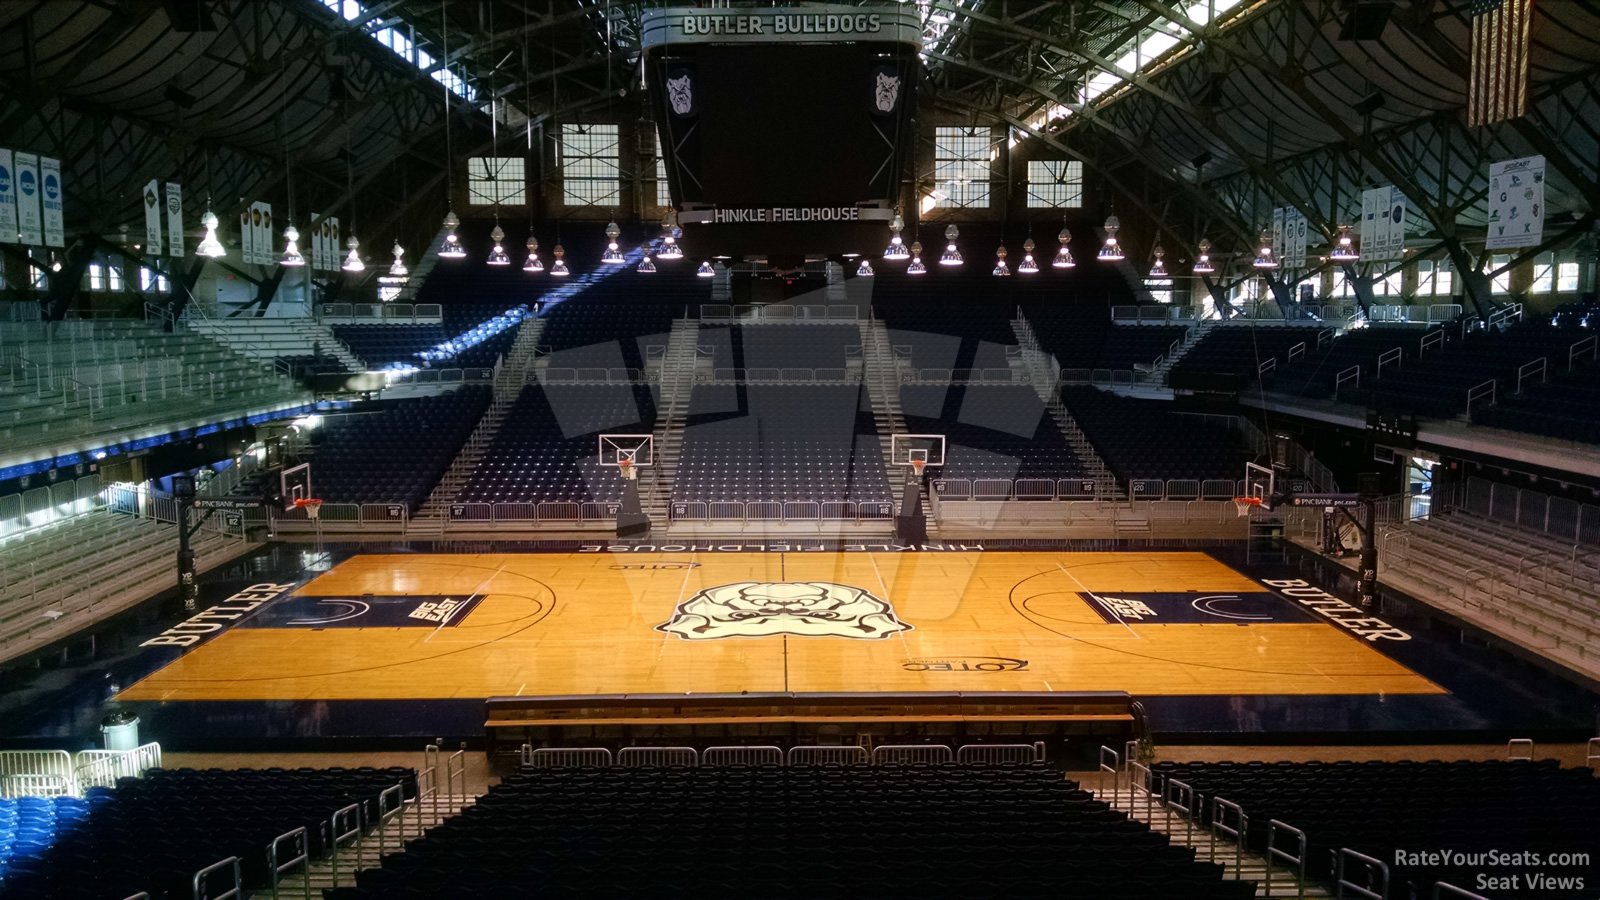 section 206, row 9 seat view  - hinkle fieldhouse